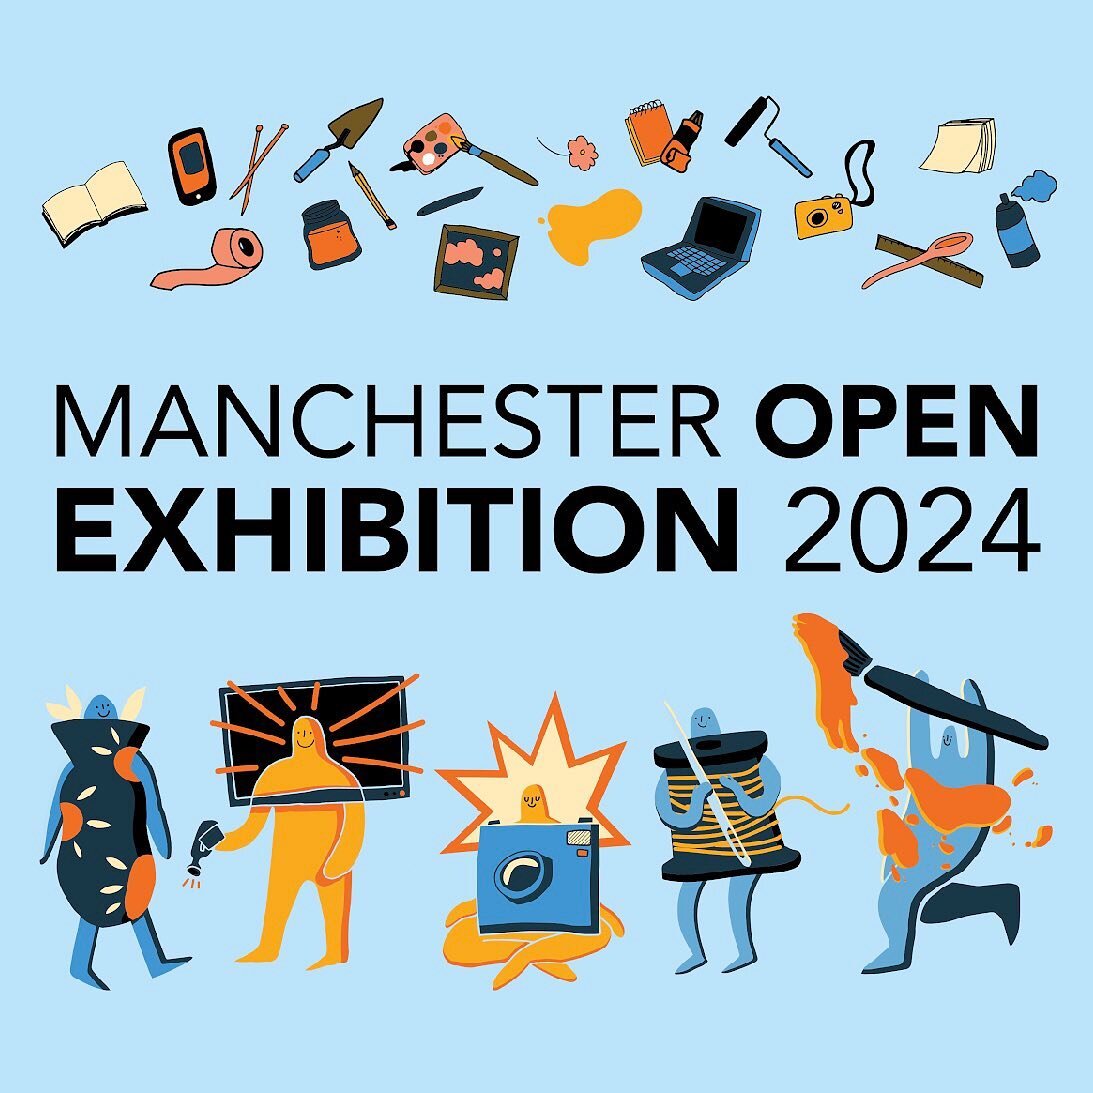 Pleased to learn today that my submission to the @homemcr #openexhibition &lsquo;Ledger&rsquo;, a varied edition of 5 etchings has been selected&hellip;Thrilled to be included in this #showcase of #manchesterartists and thank you to the selection pan